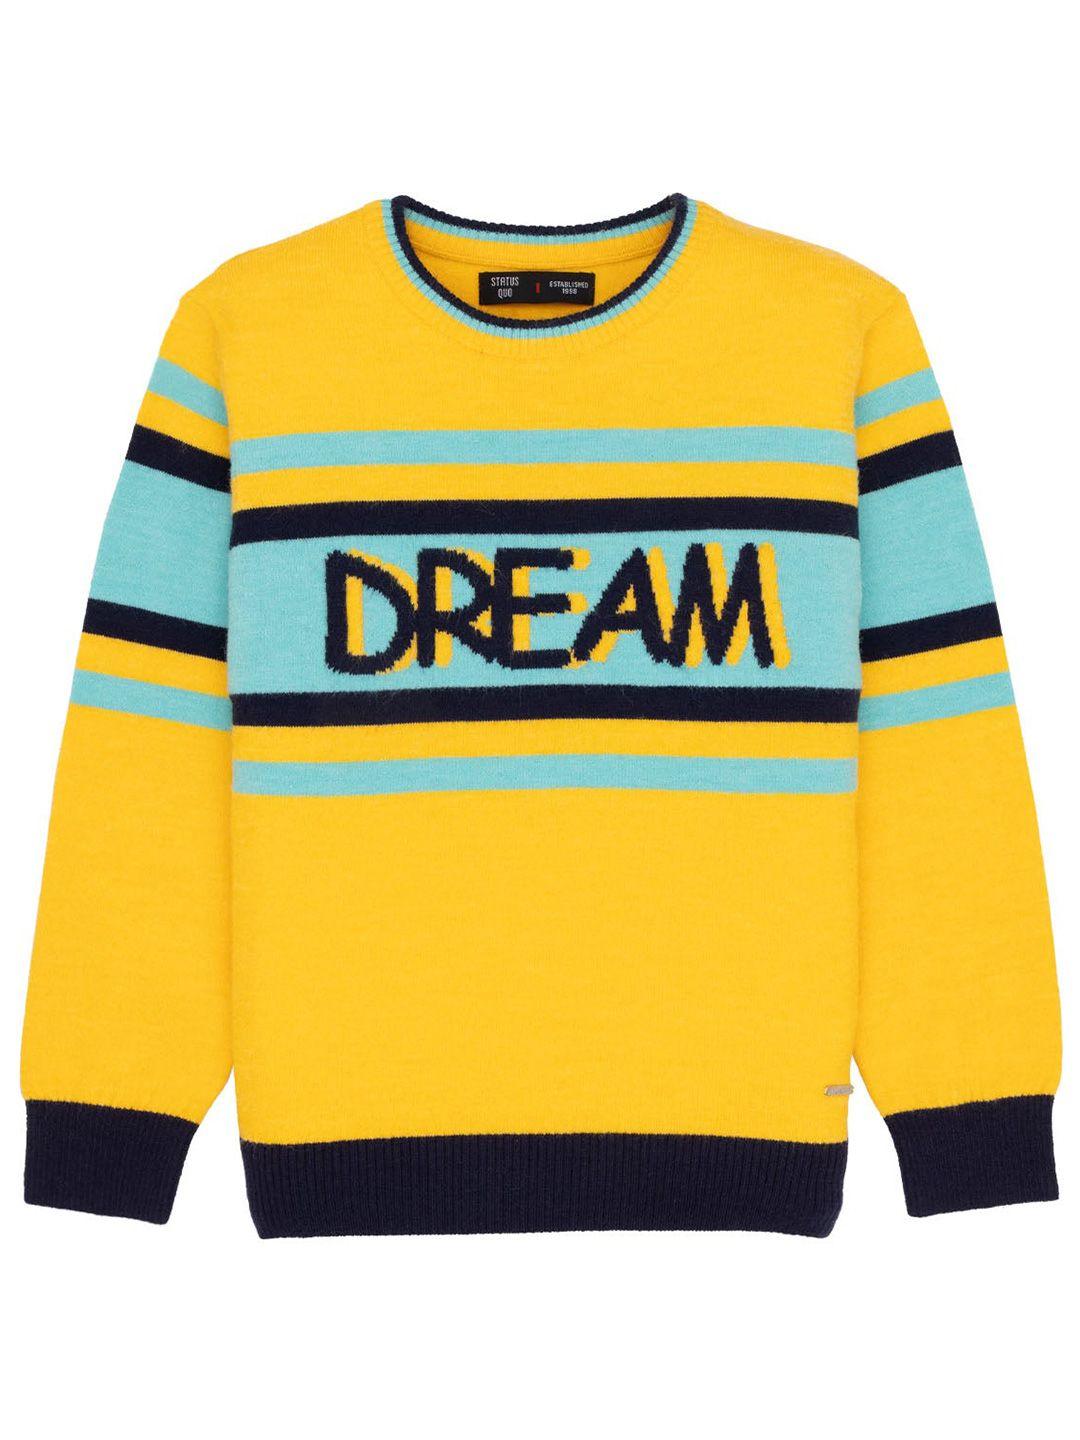 status quo boys yellow & blue typography printed pullover